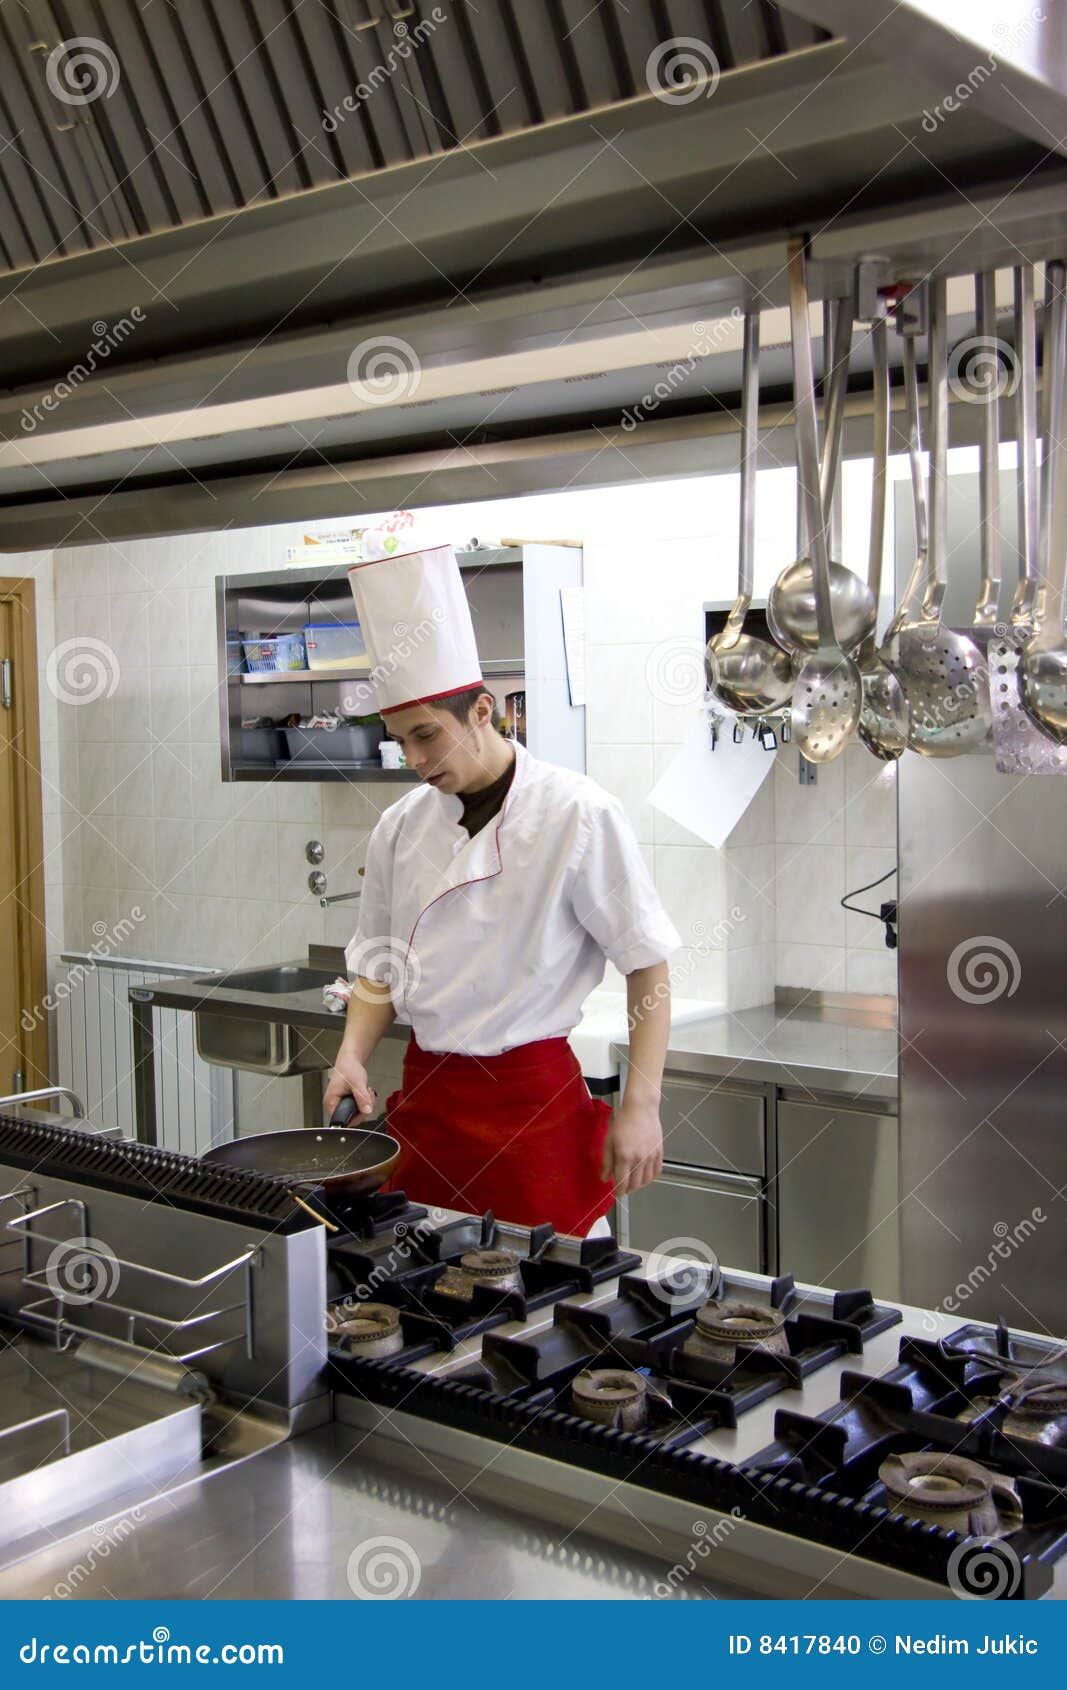 young chef working